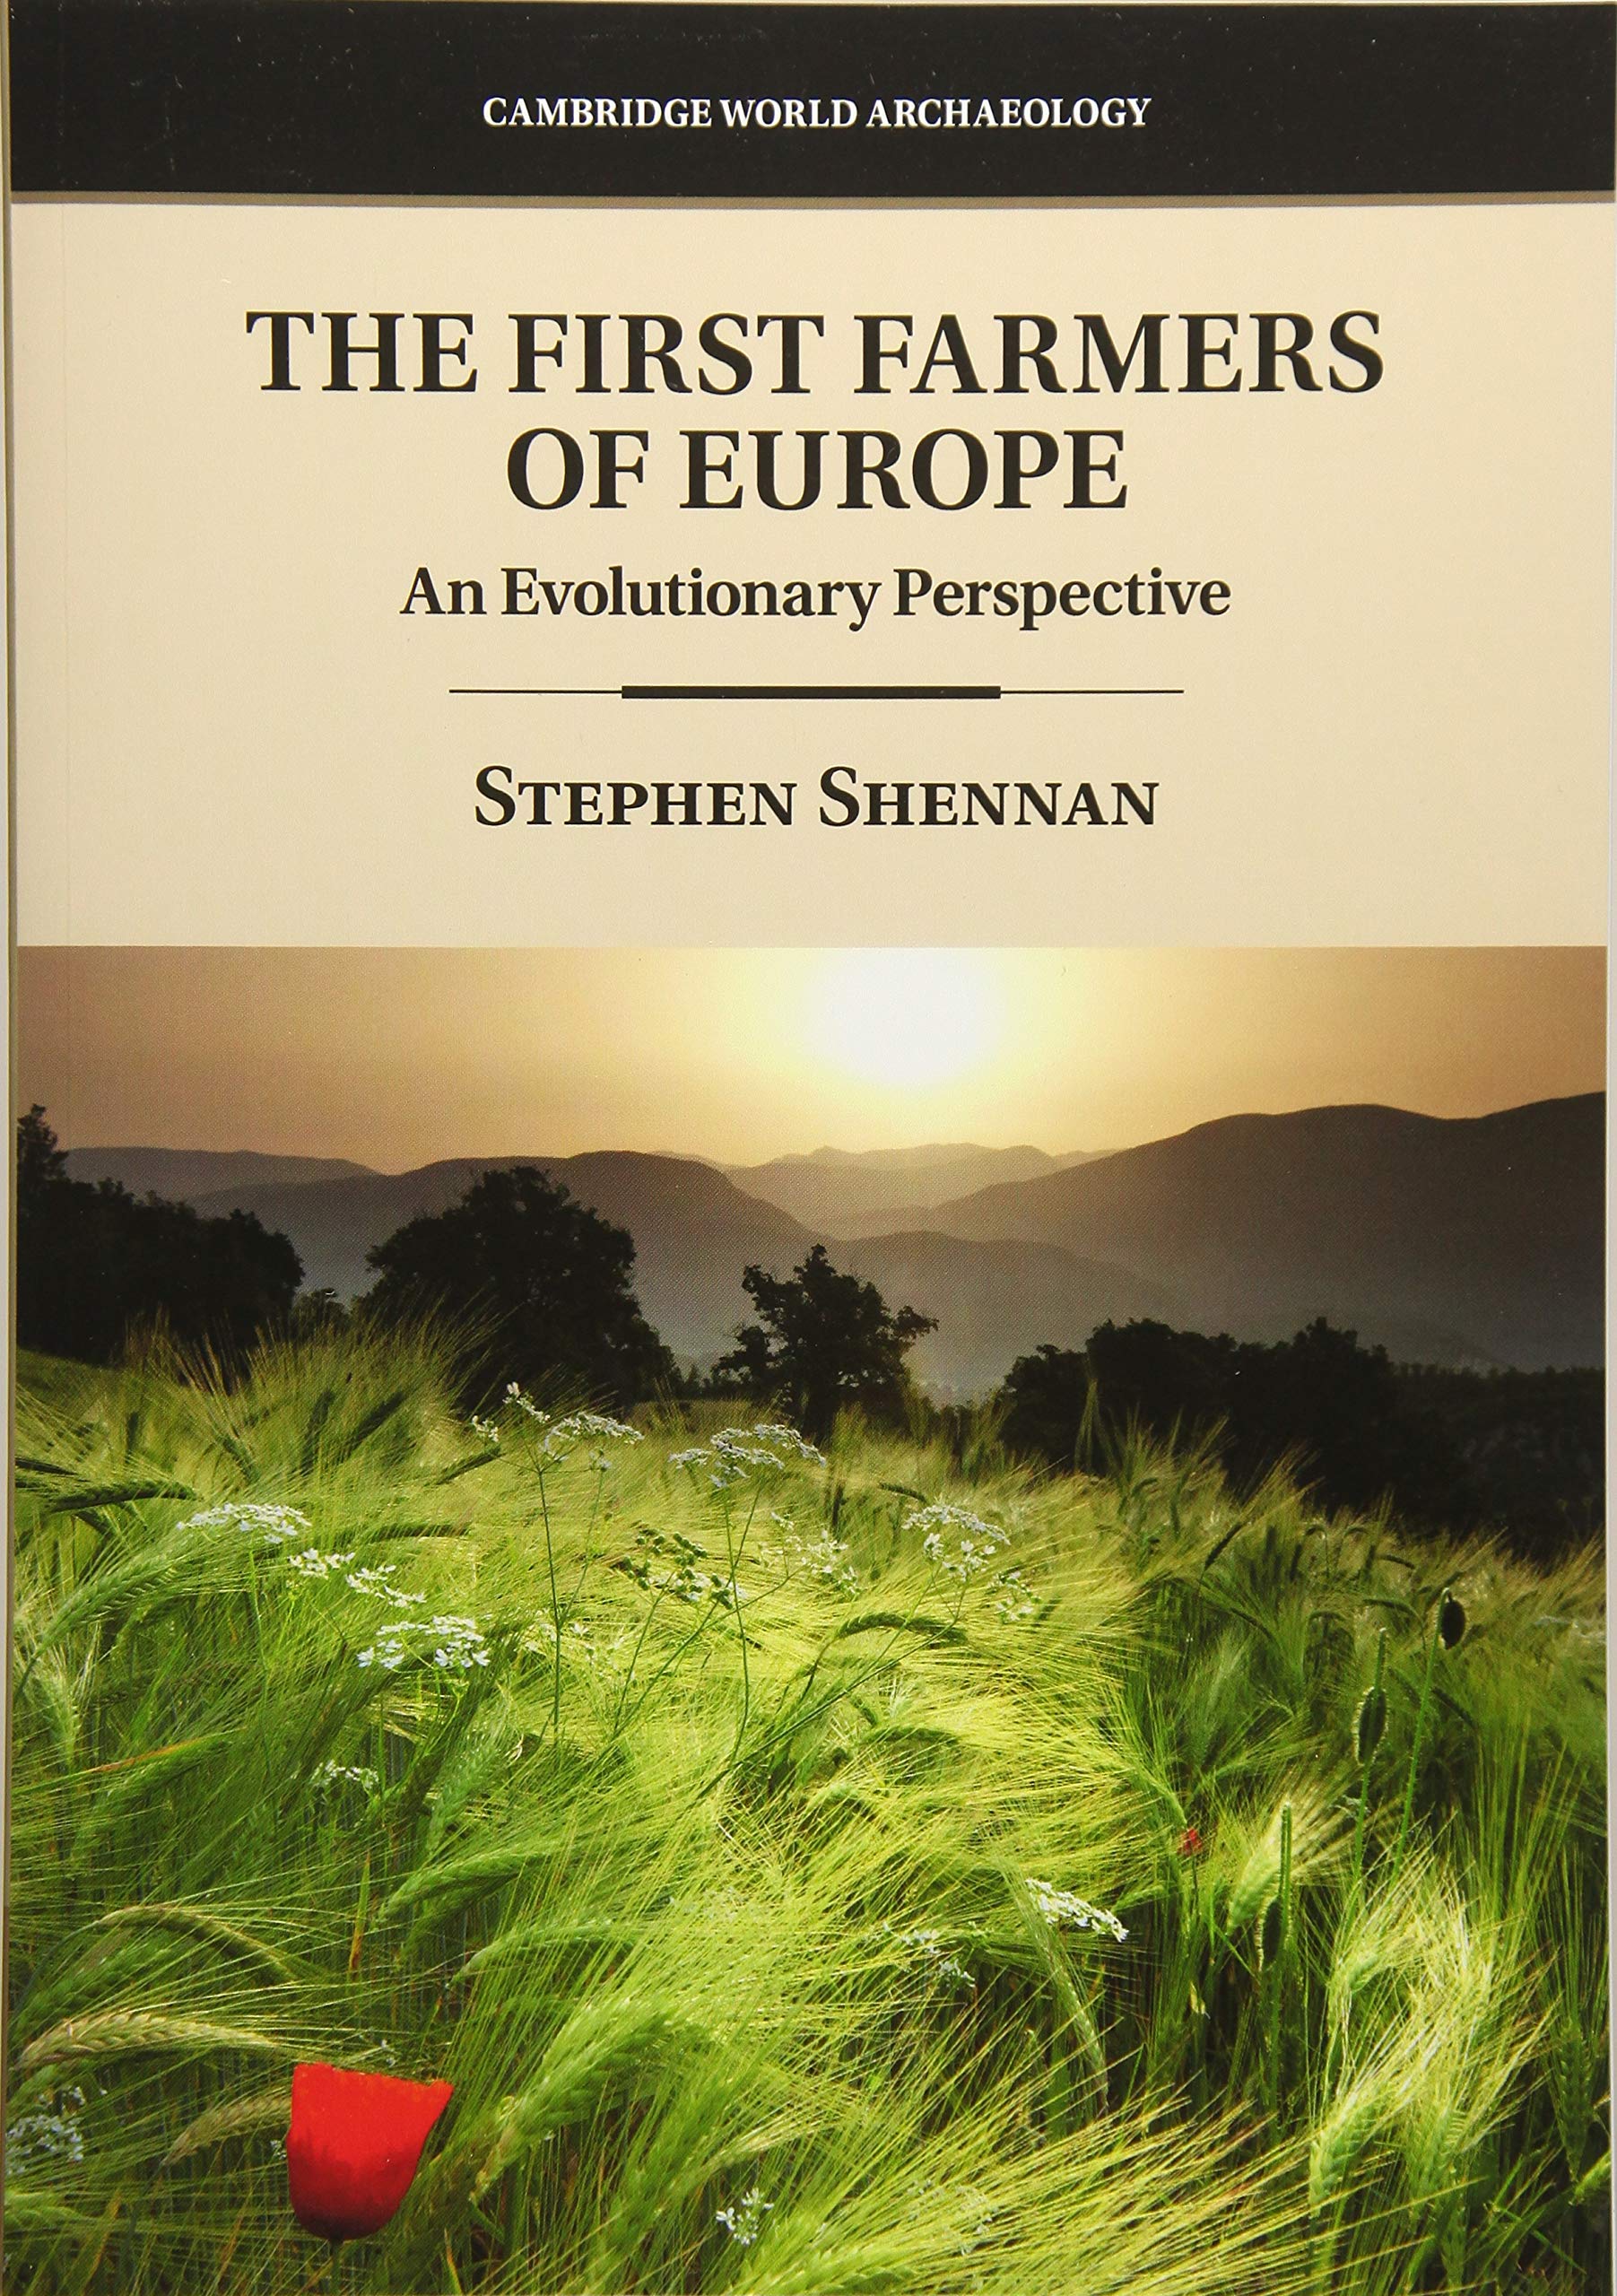 The First Farmers of Europe. An Evolutionary Perspective, 2018, 266 p.